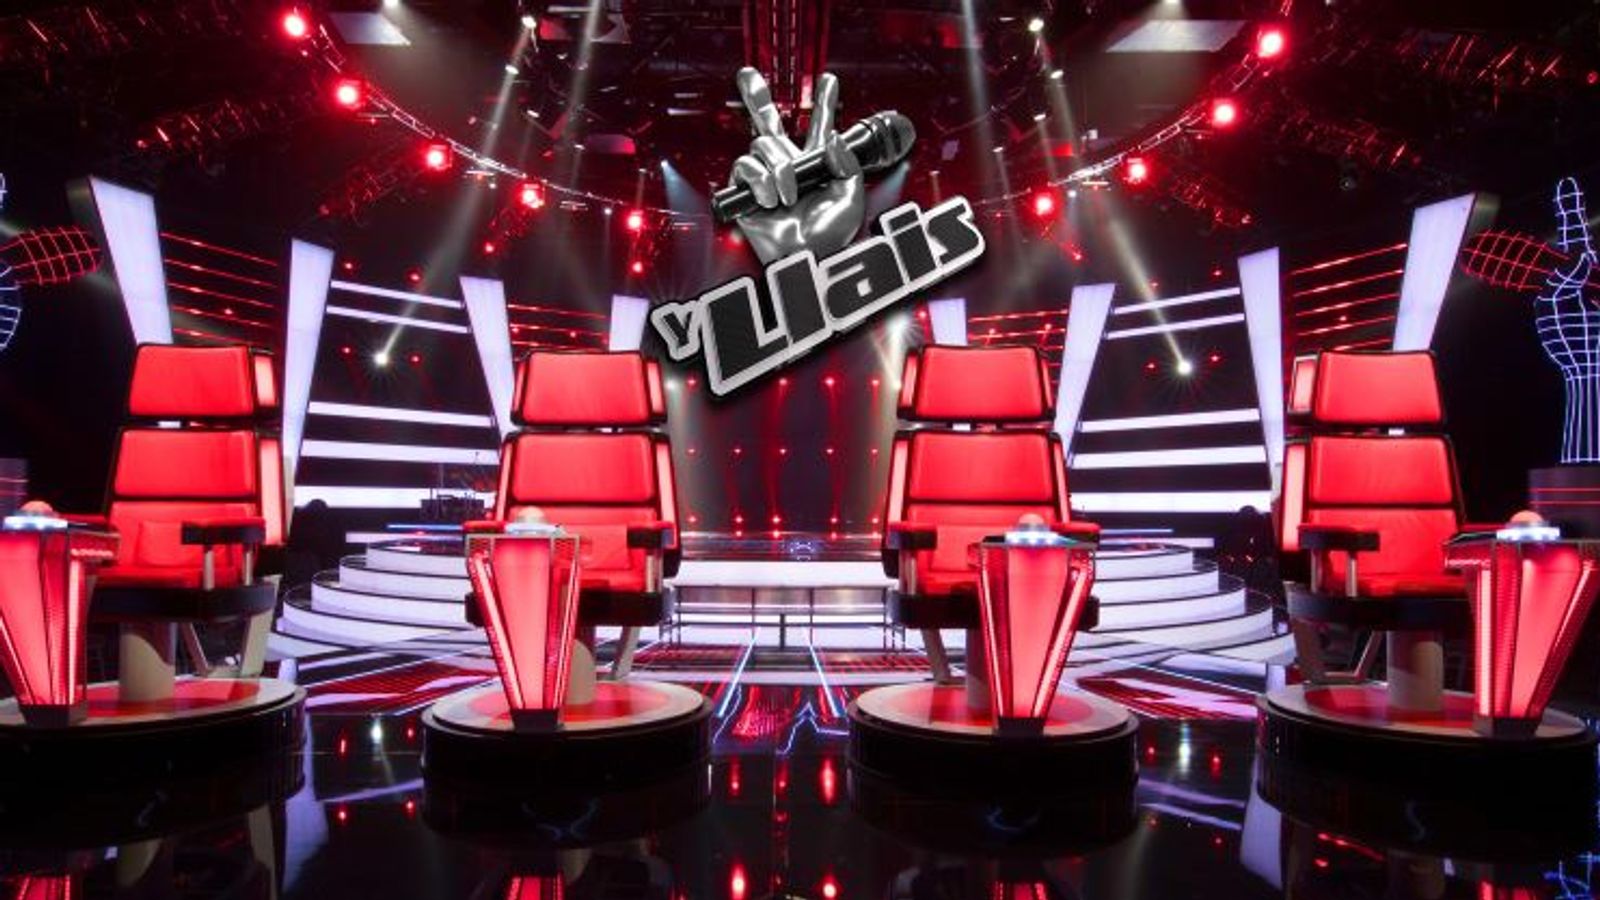 Wales to get own version of The Voice hosted by Radio 1 DJ